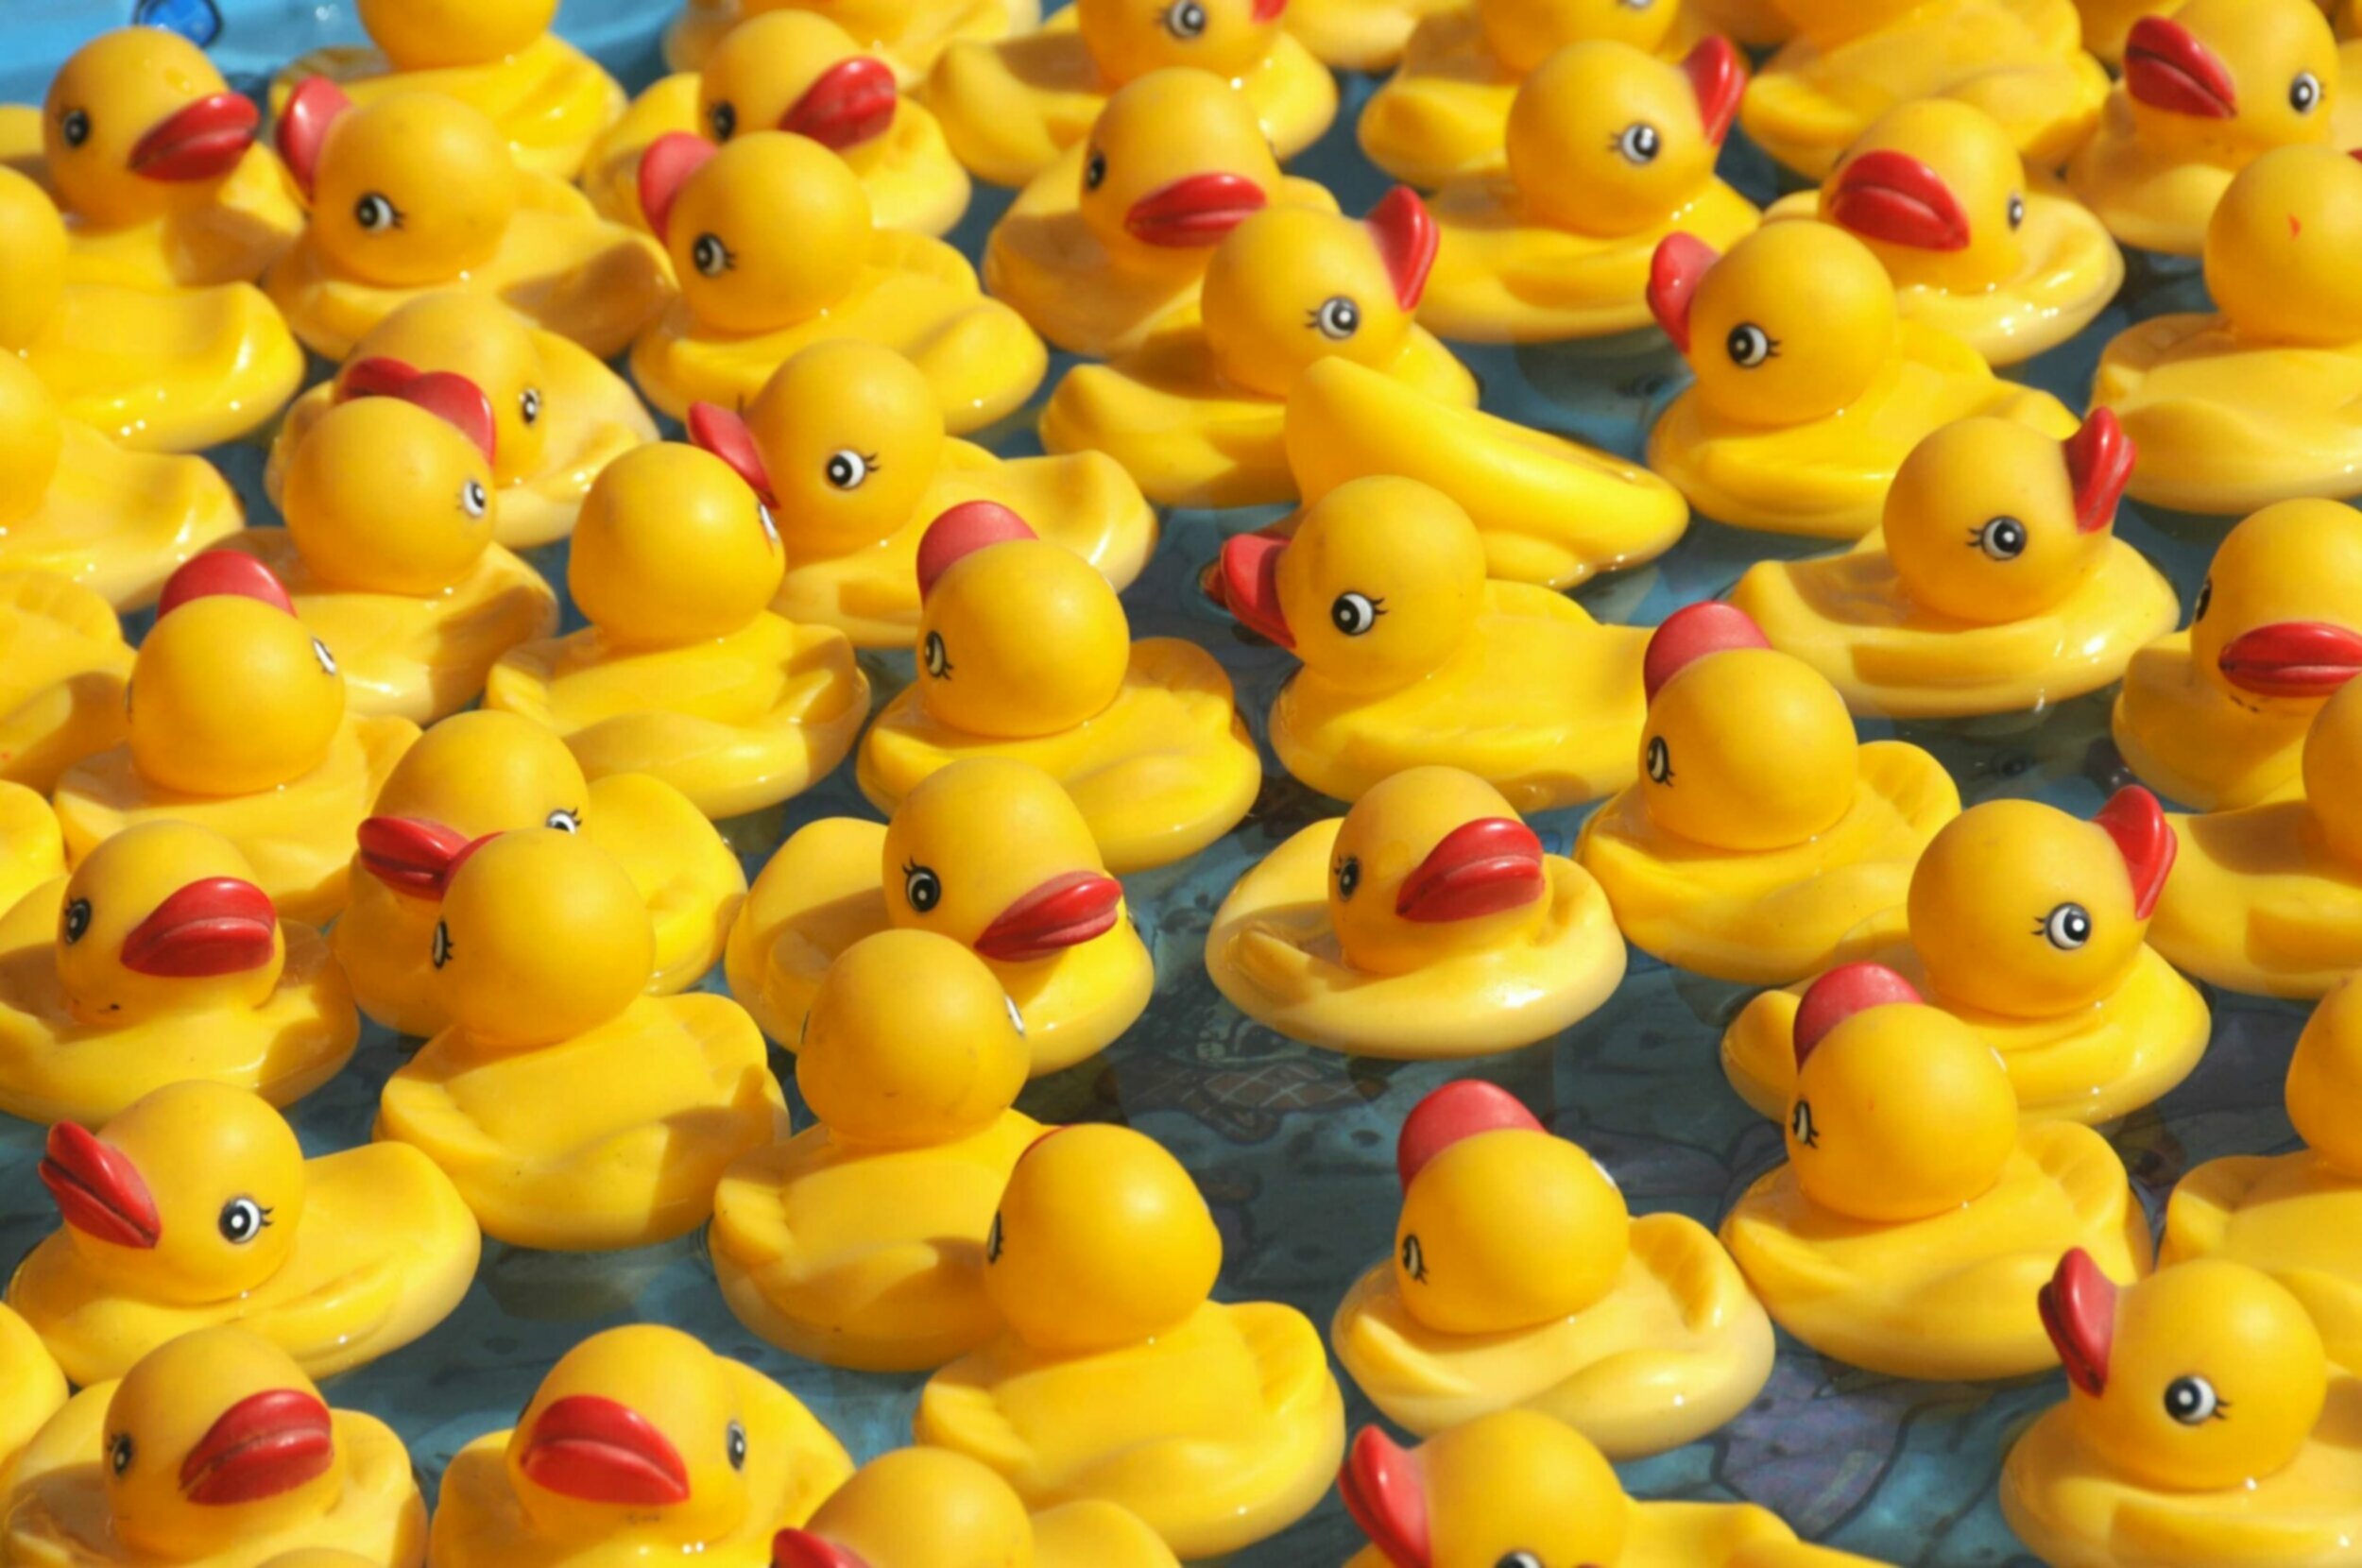 How To Debug Something With A Rubber Duck